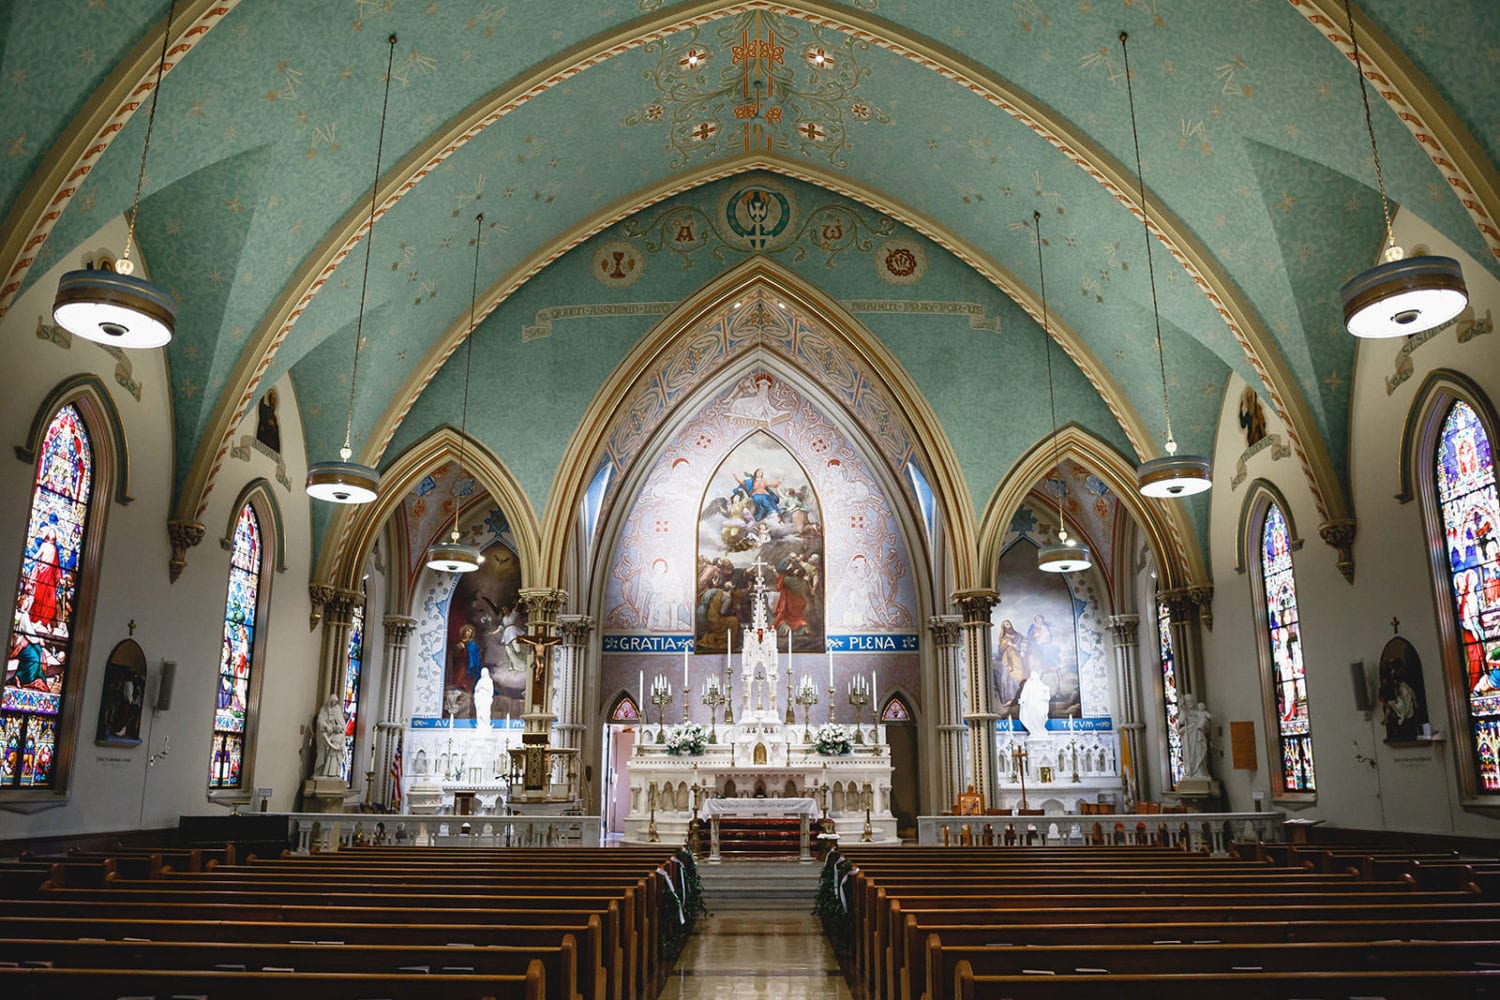 St. Mary's is a beautiful church with a stunning ceiling, perfect for weddings in the Lancaster PA area